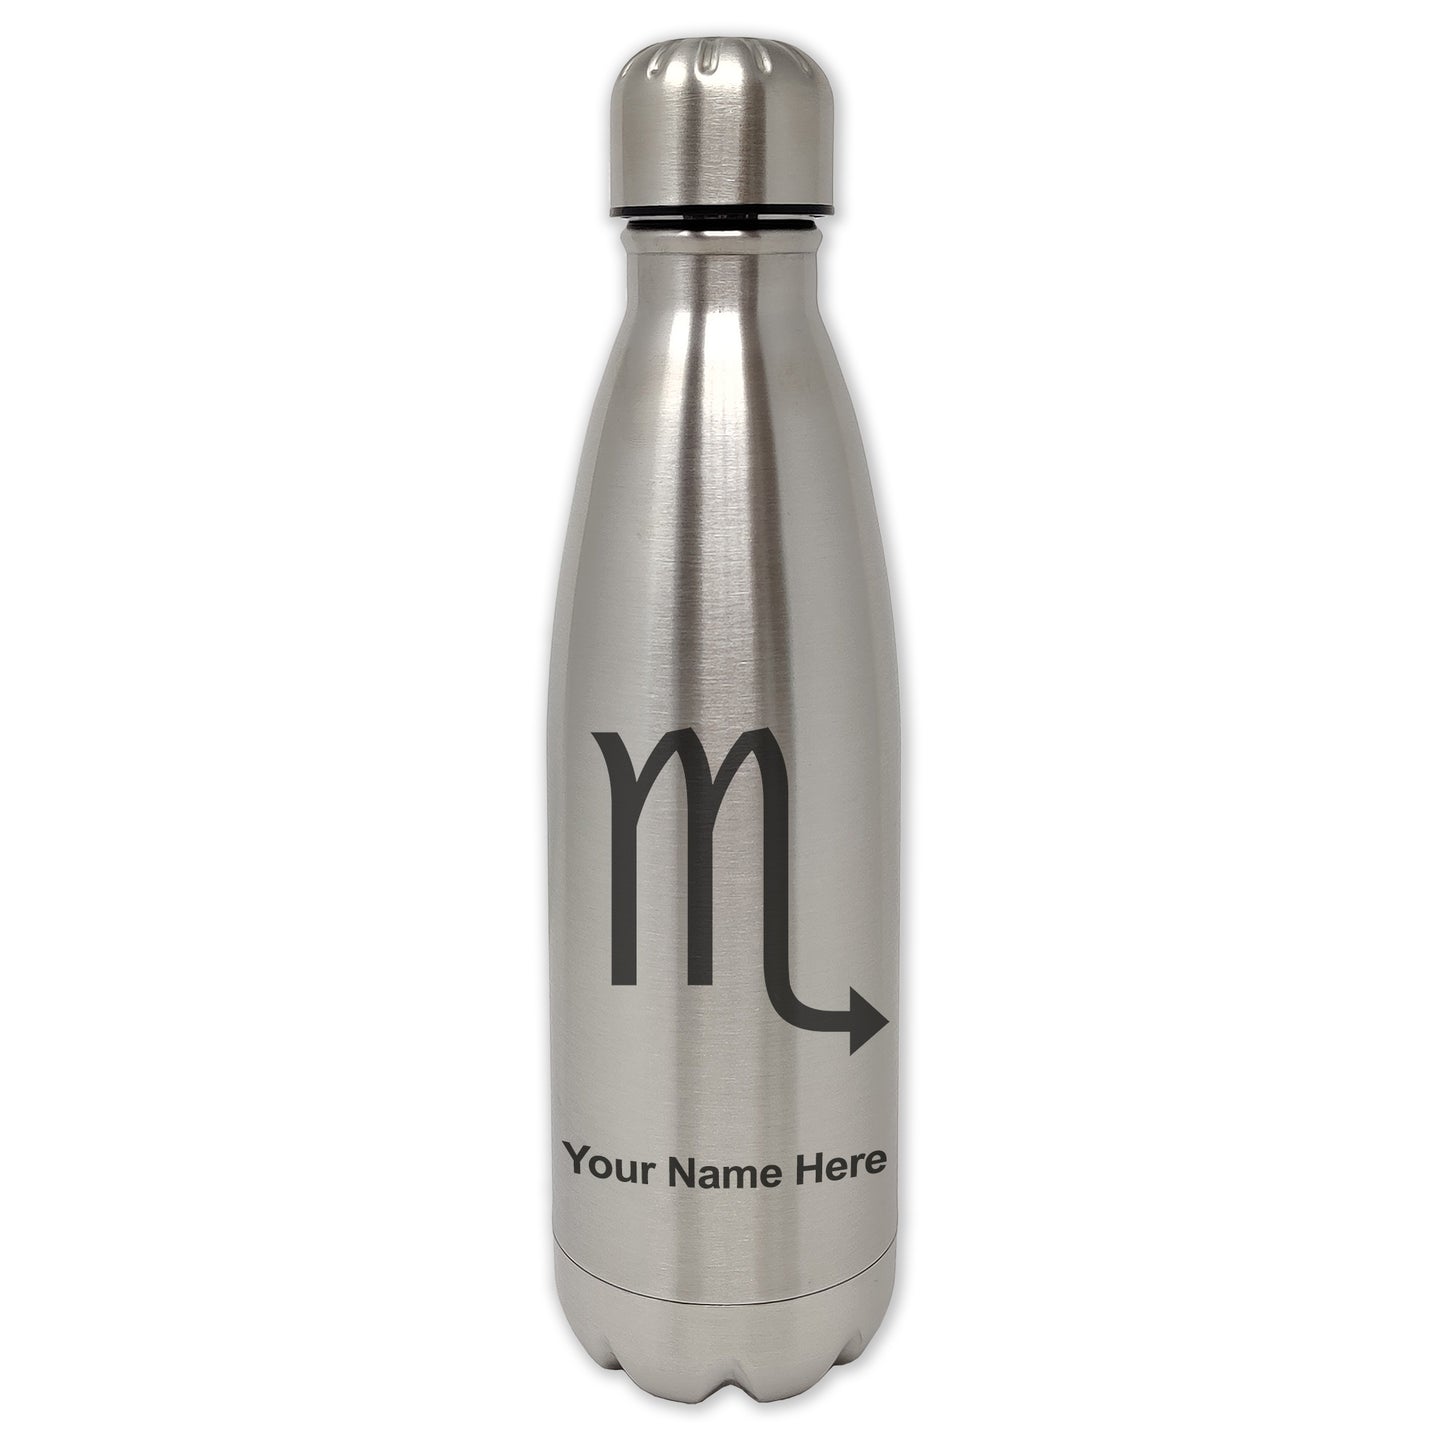 LaserGram Single Wall Water Bottle, Zodiac Sign Scorpio, Personalized Engraving Included